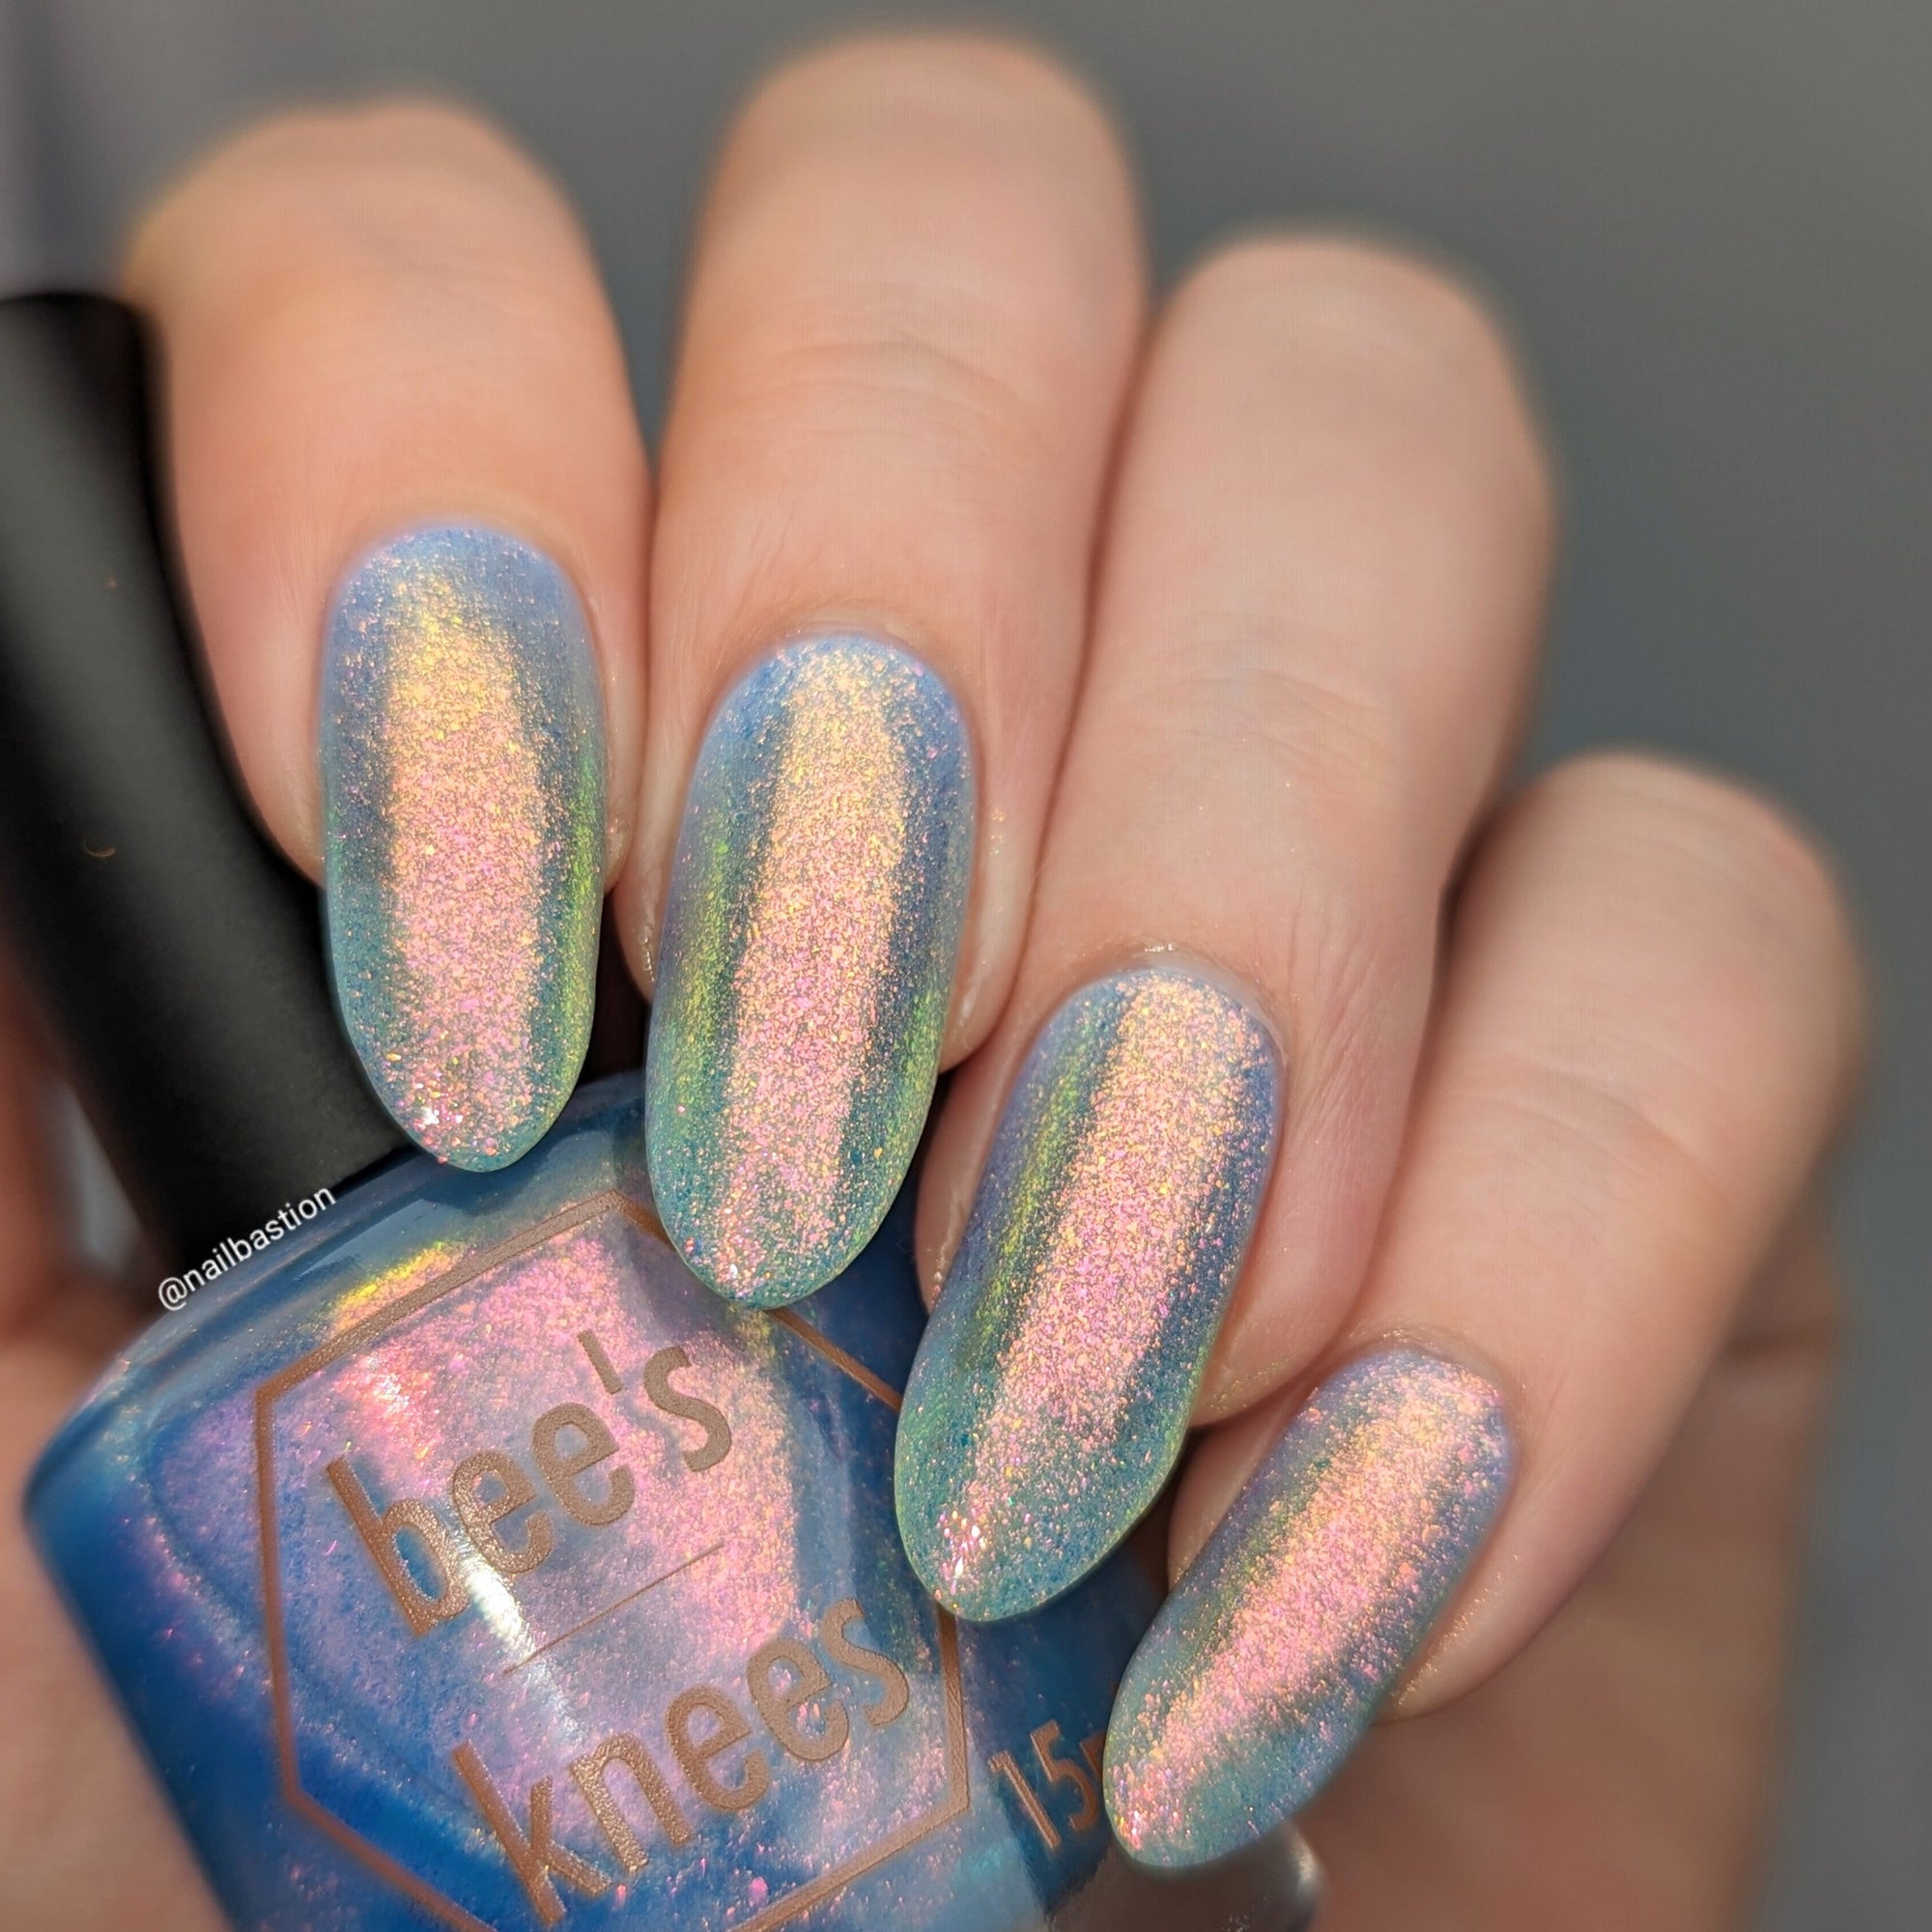 *PRE-ORDER* Bee's Knees Lacquer - They Would Know My Name One Day